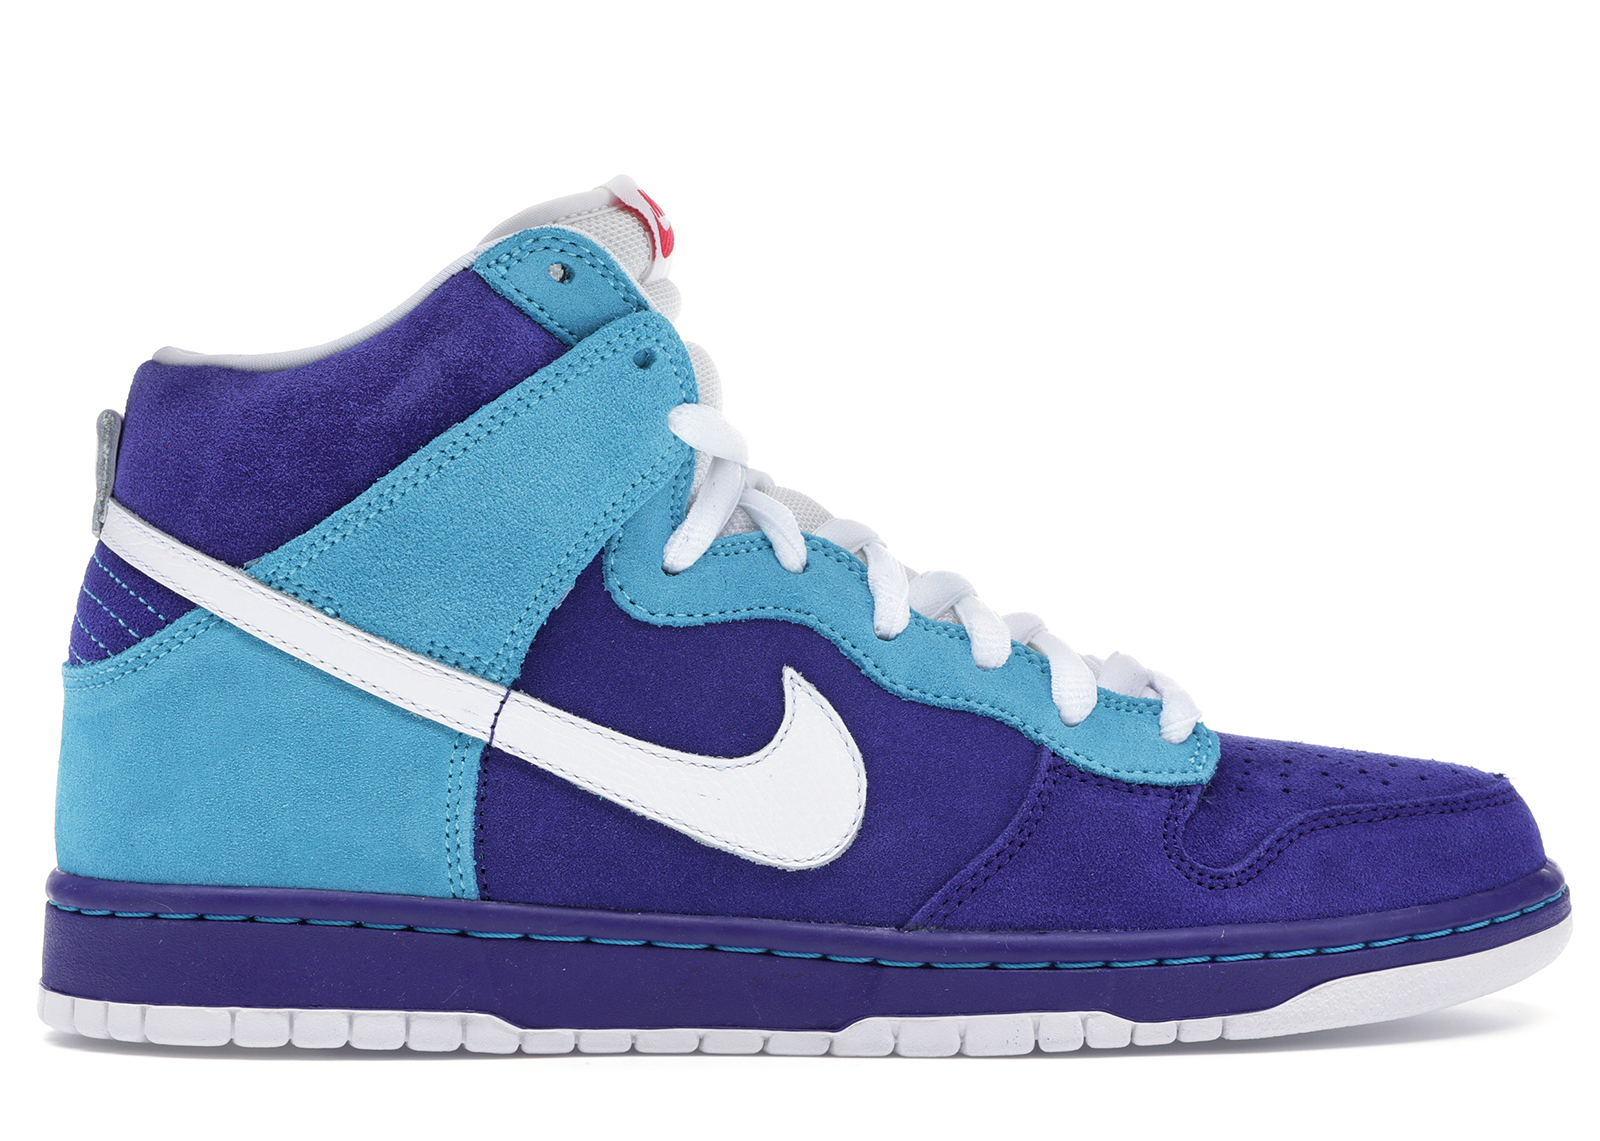 Nike Dunk SB High Oceanic Airlines - 305050-400